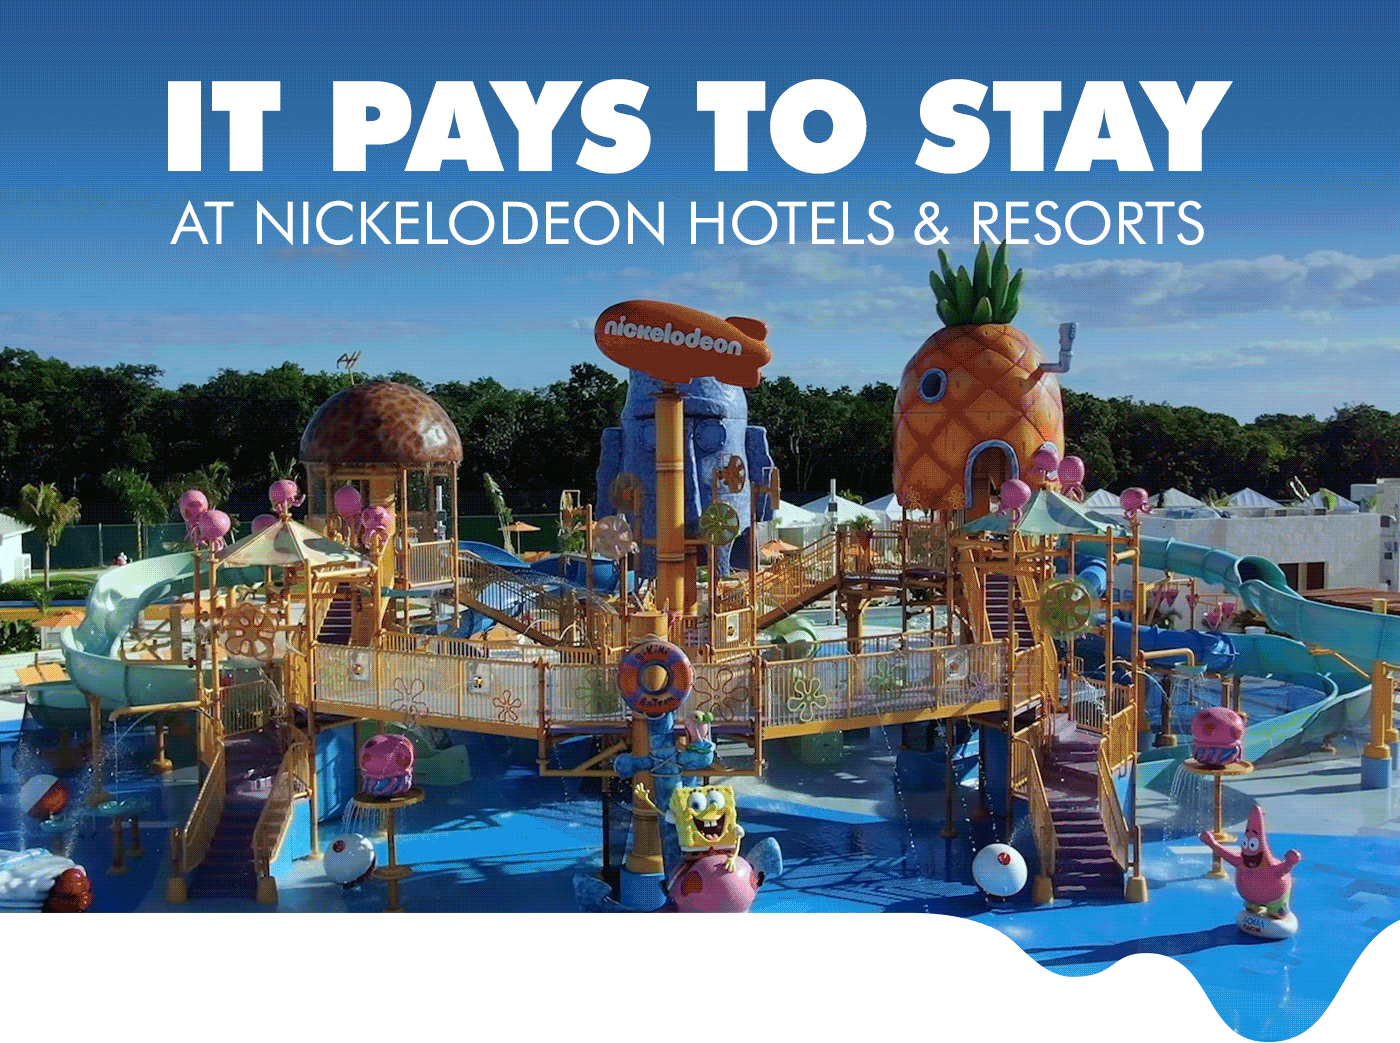 IT PAYS TO STAY AT NICKELODEON HOTELS & RESORTS